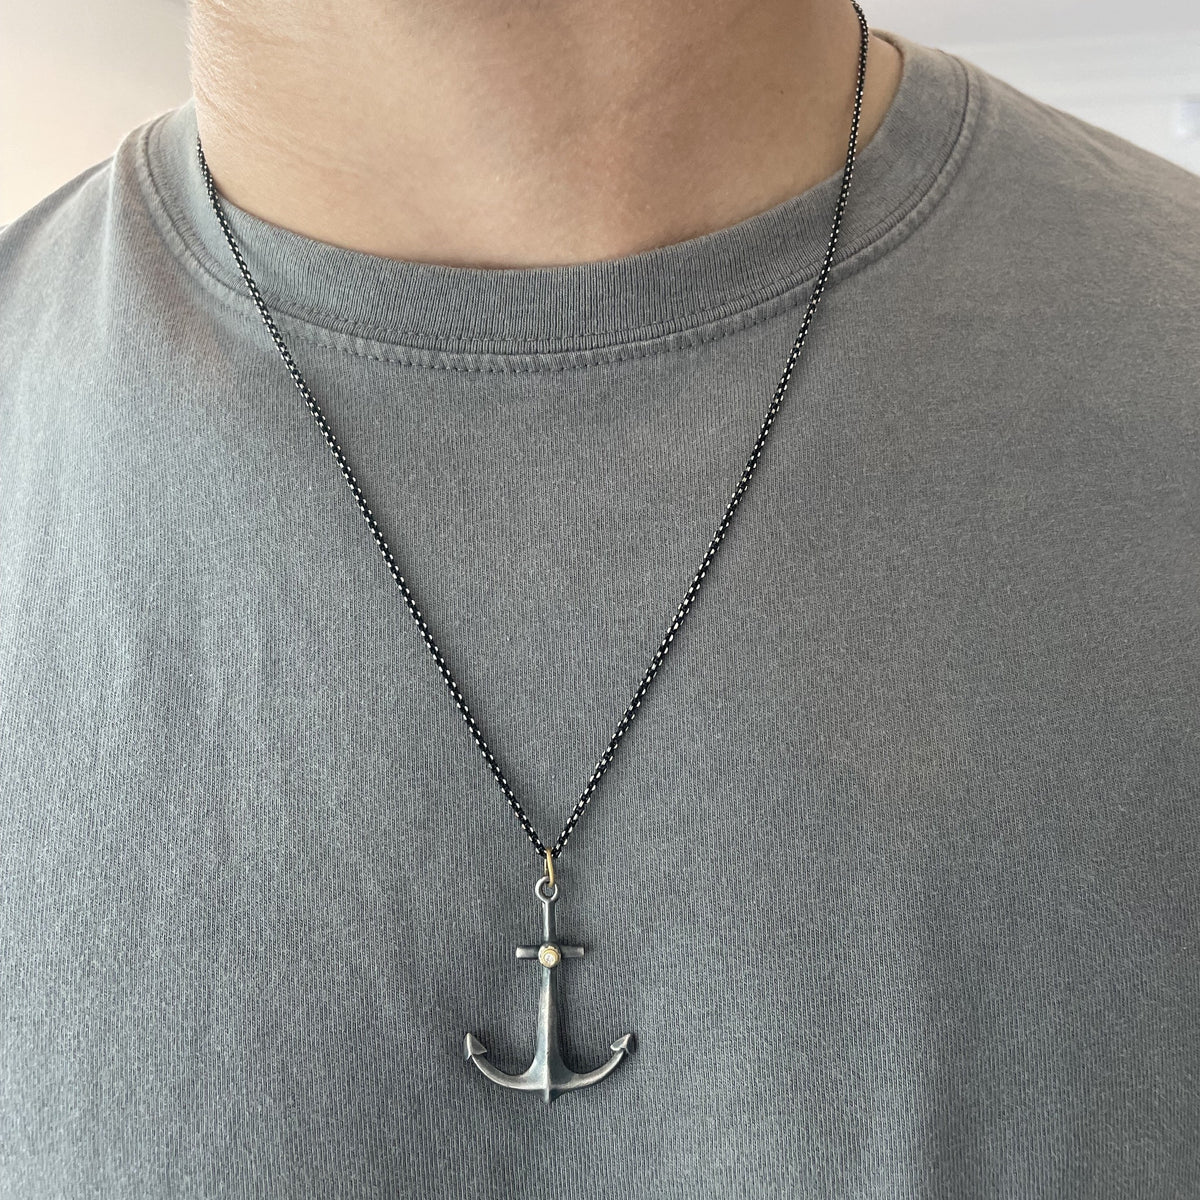 Unisex 1cm Sterling Silver Anchor Rambo Chain Necklace 18'' 20